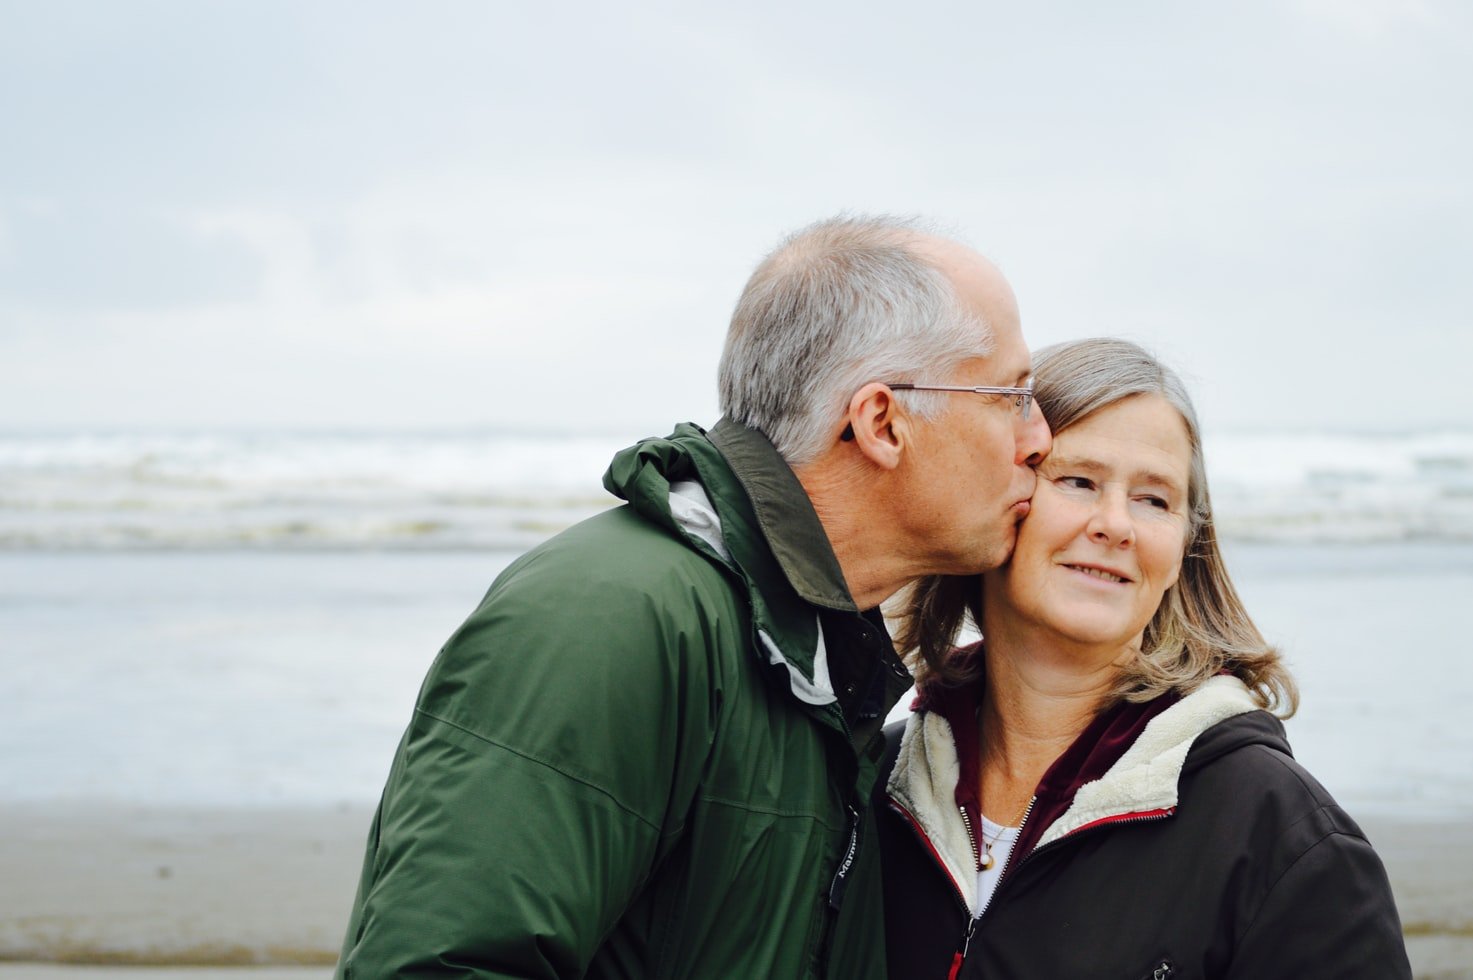 Amanda and Steve decided to fight his cancer | Source: Unsplash